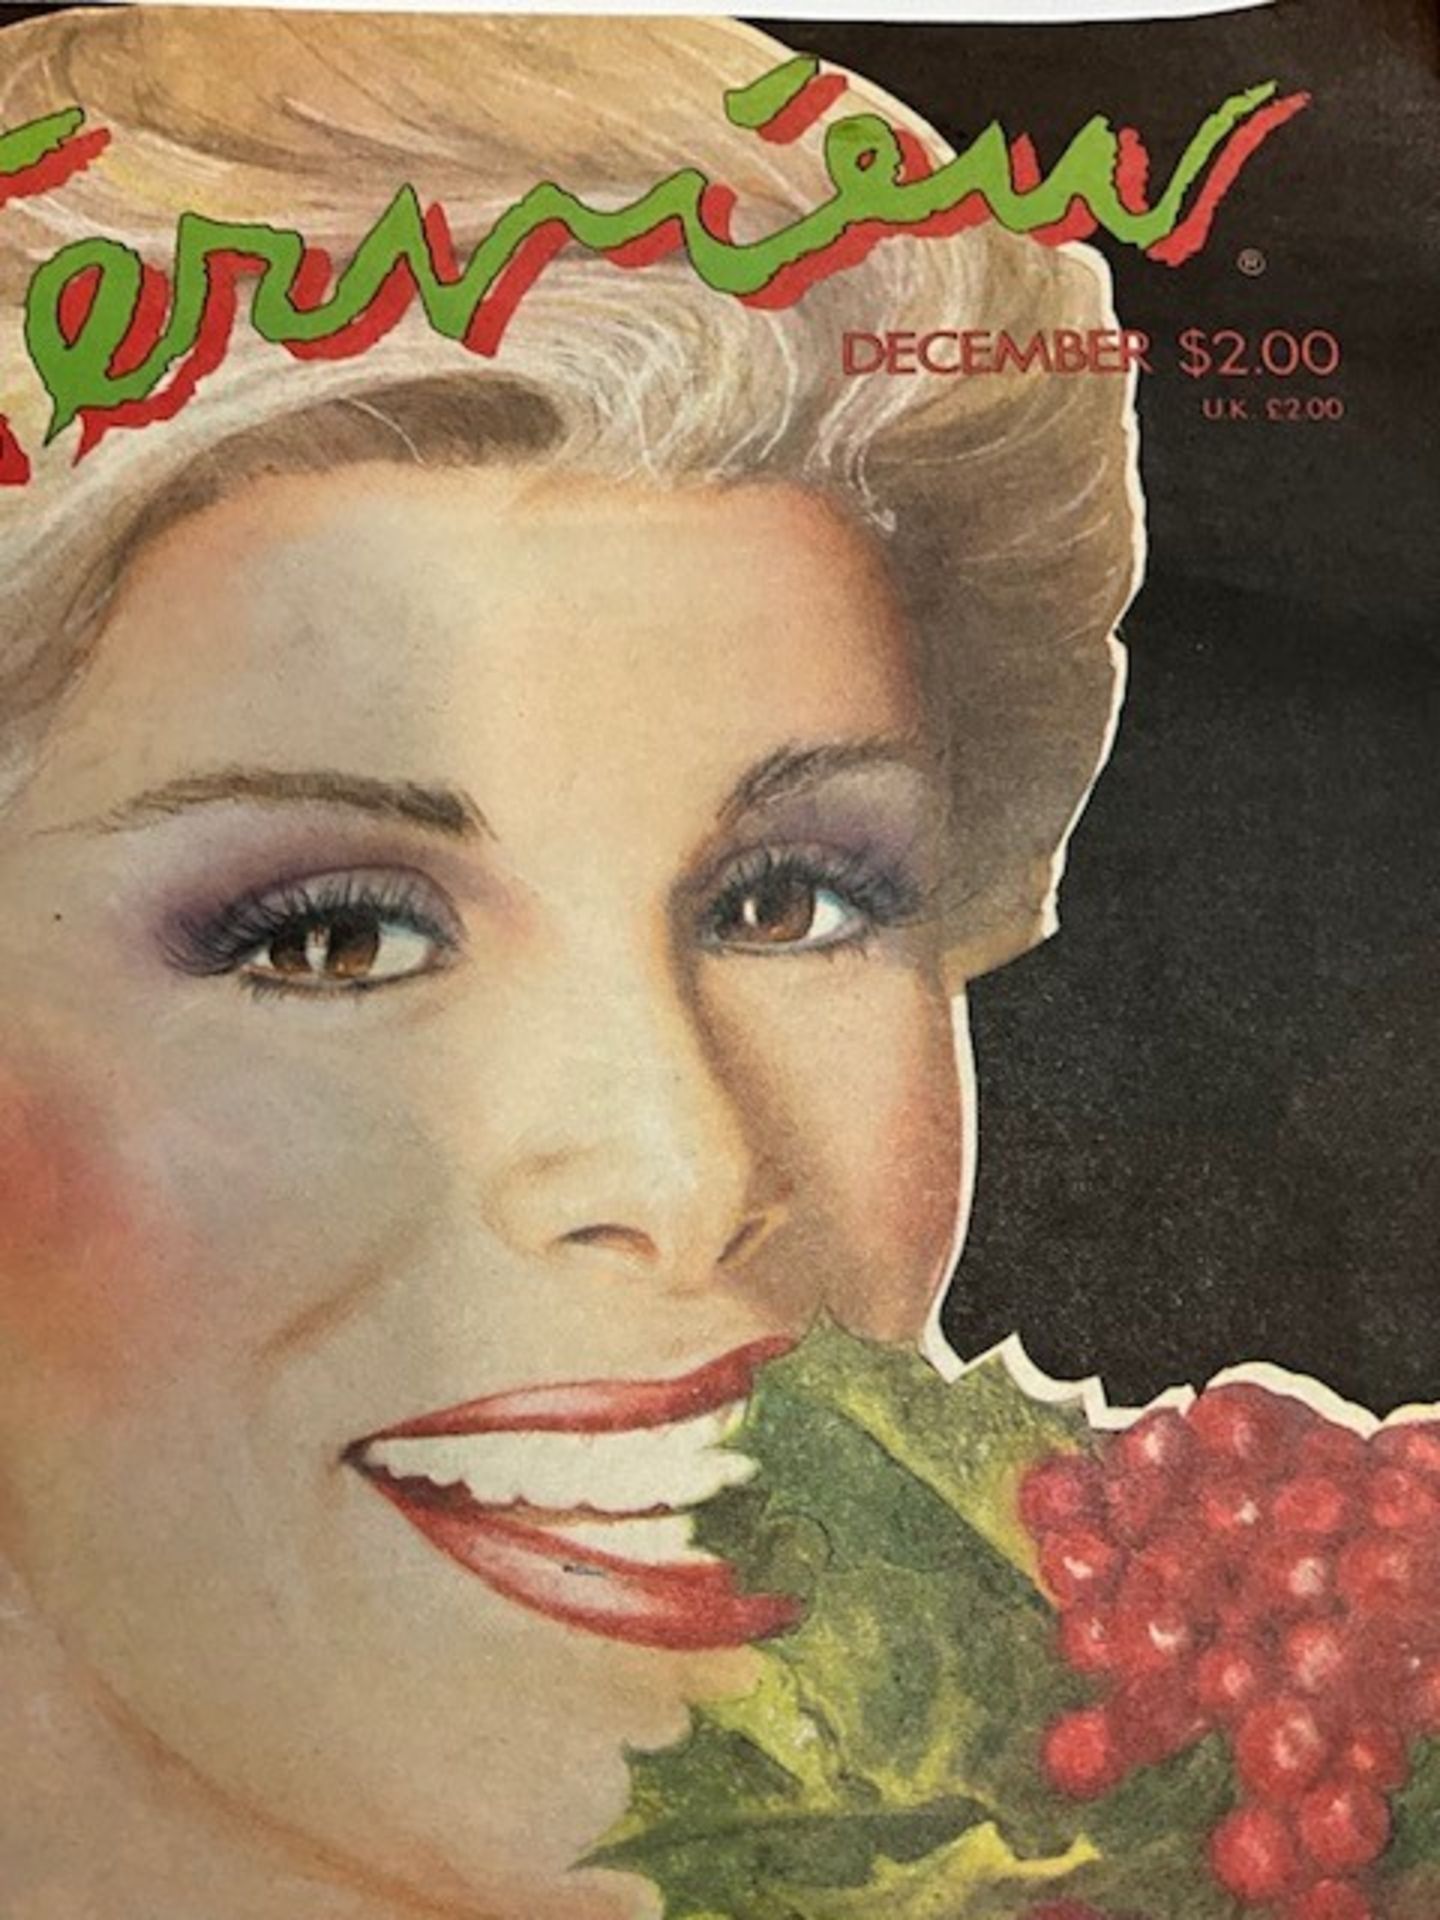 Andy Warhol" JOAN RIVERS" Hand Signed Interview Magazine Cover - Image 5 of 6